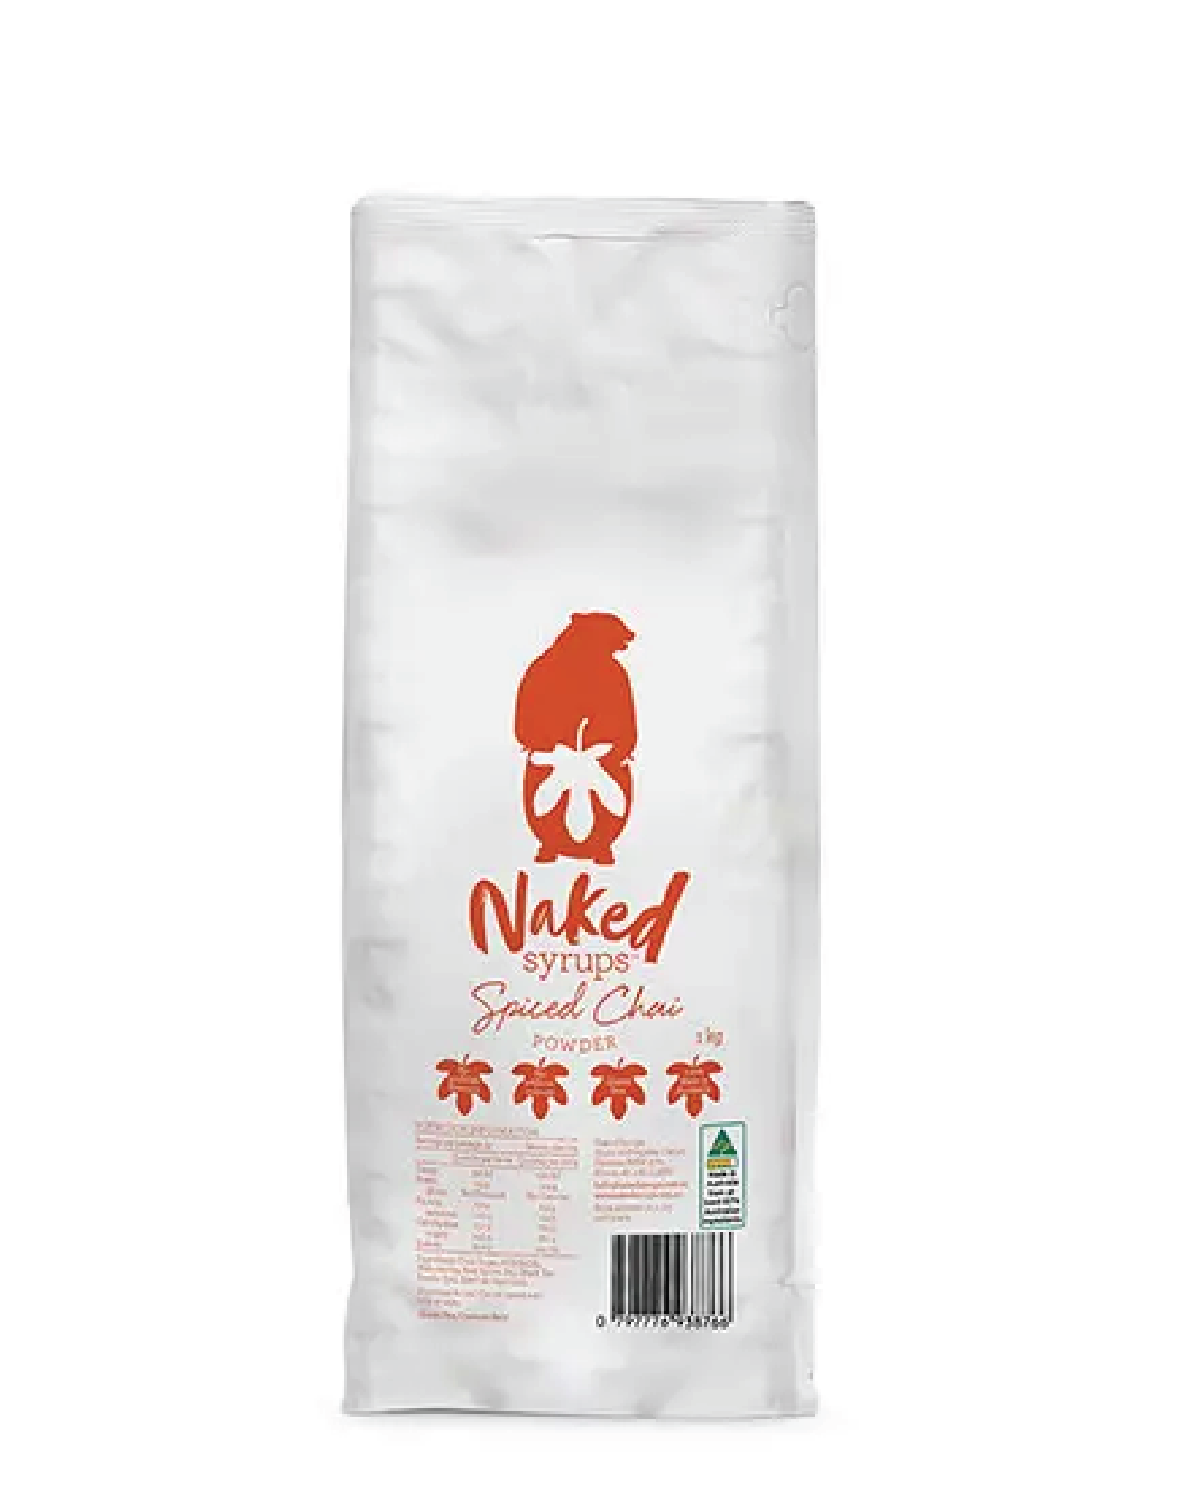 Naked Syrups Spiced Chai Latte (1kg)